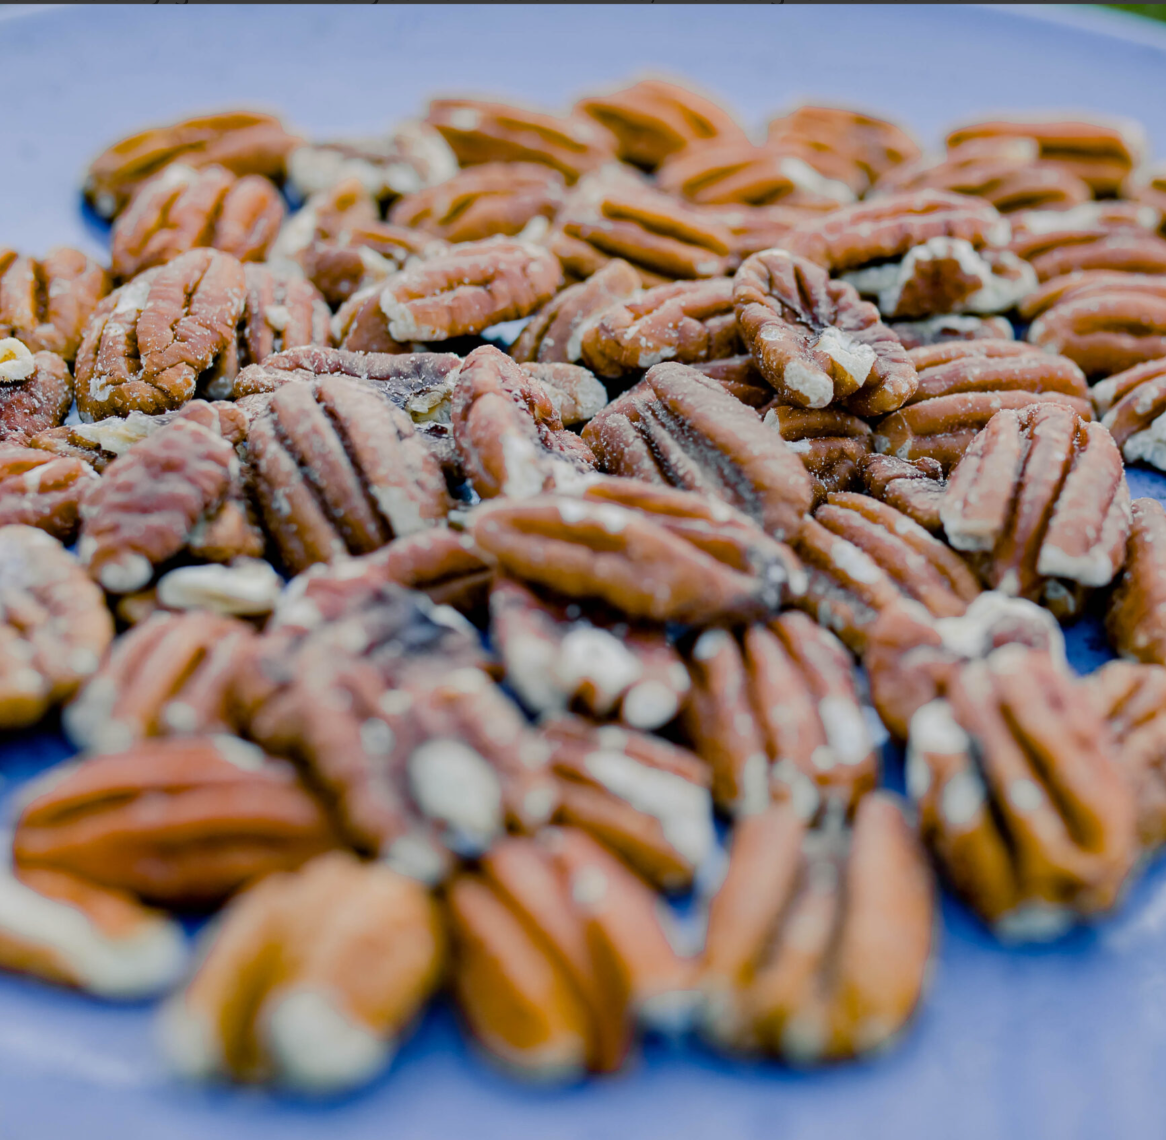 Lightly Roasted + Salted Pecans by Zorro Pecans